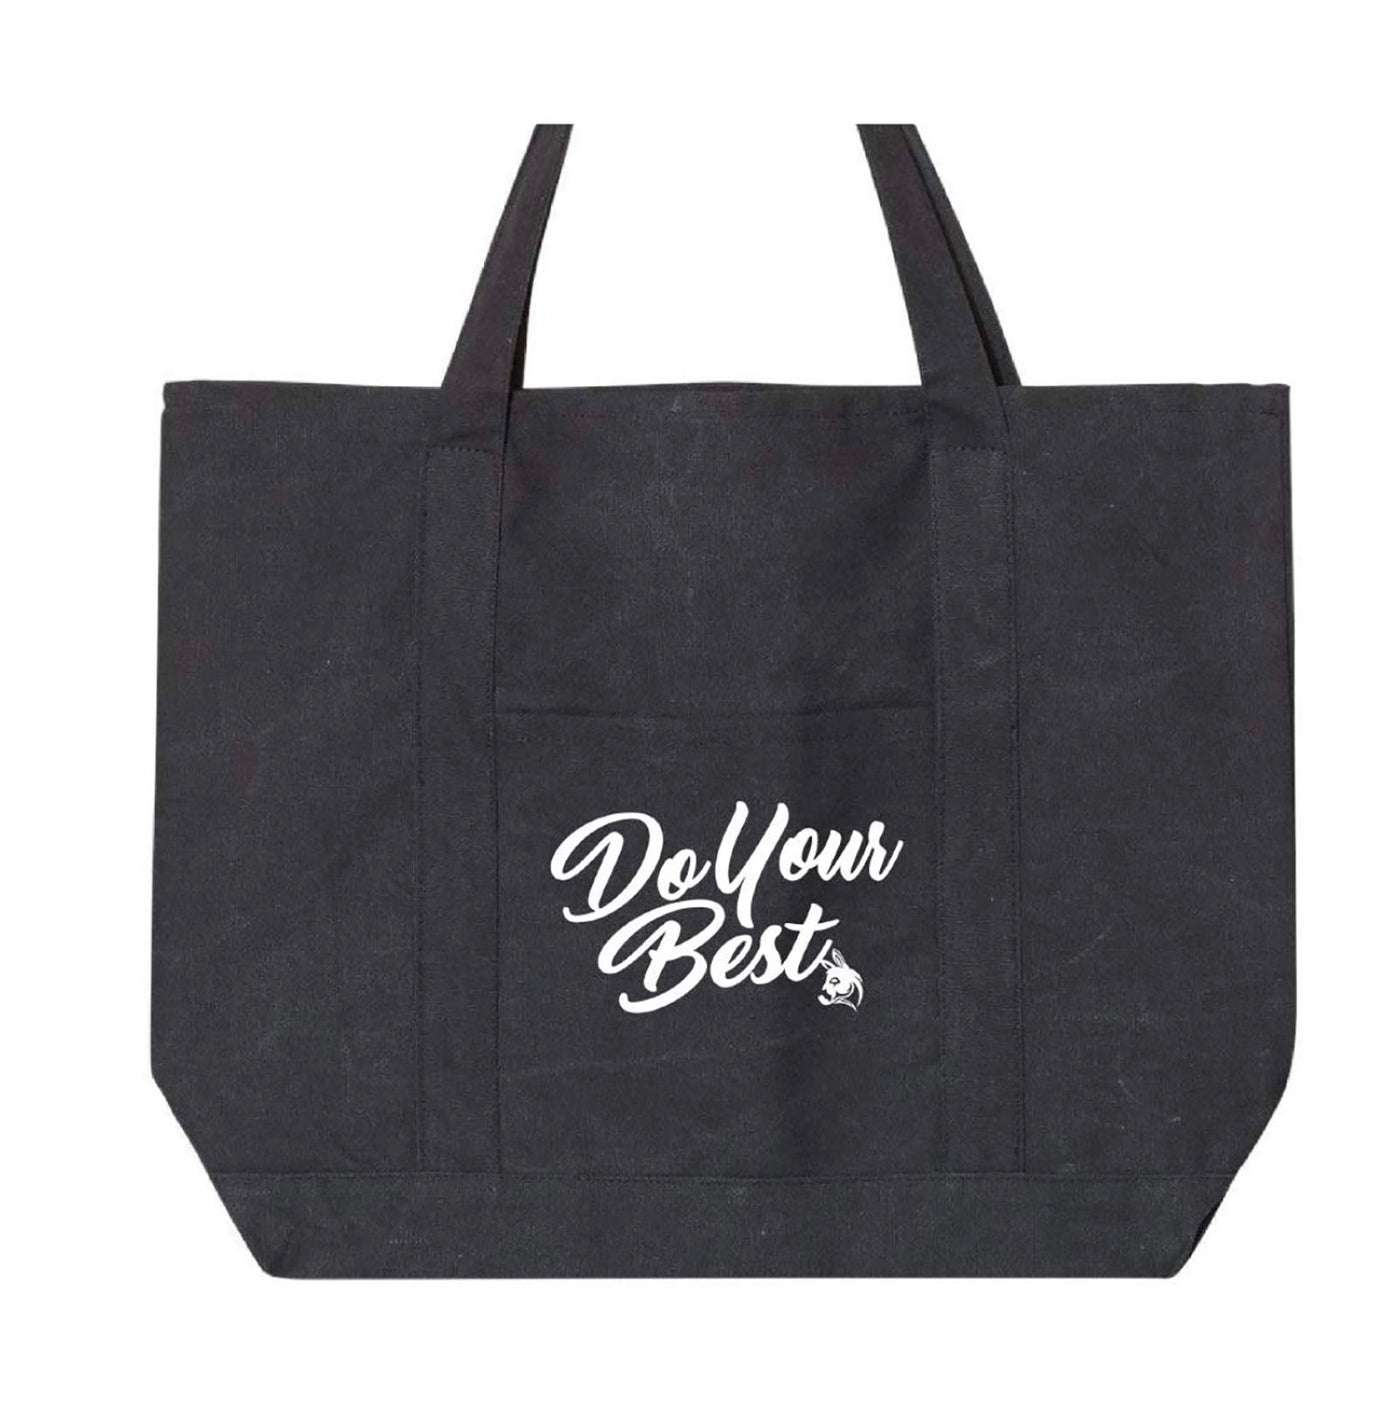 DO YOUR BEST TOTE BAG